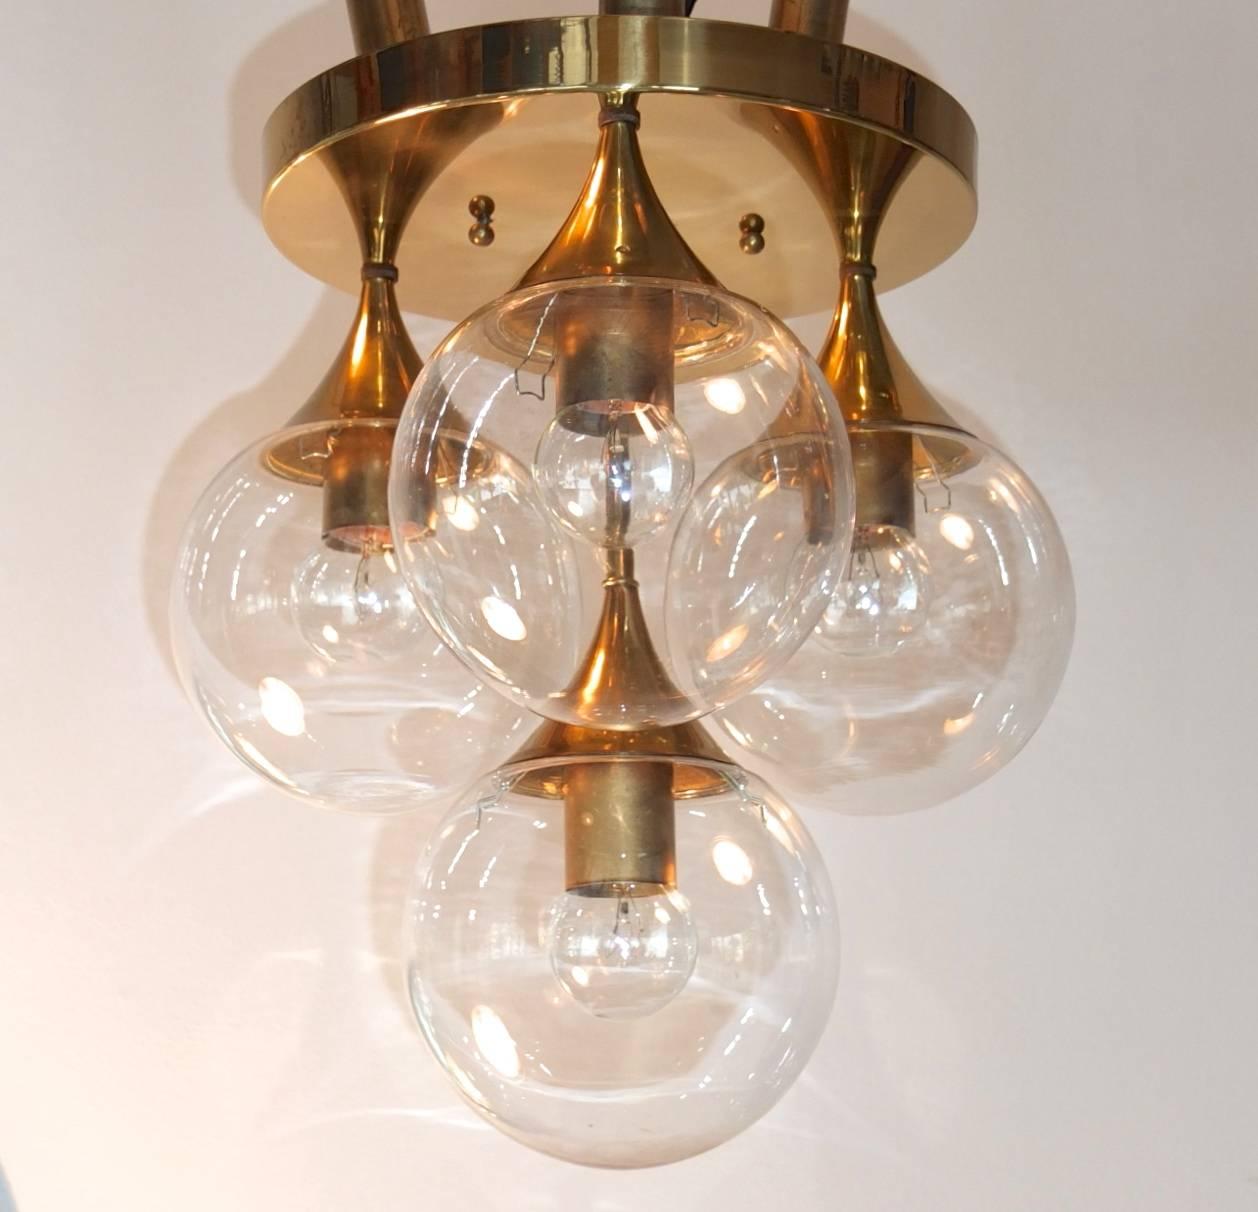 Groovy 1960s ceiling mounted light fixture by Lightolier with four clear glass globe lights on brass horn stems. Four standard Edison screw sockets for bulbs up to 75 watts each. Very good condition. Nice light patina to the brass. Globes are easy